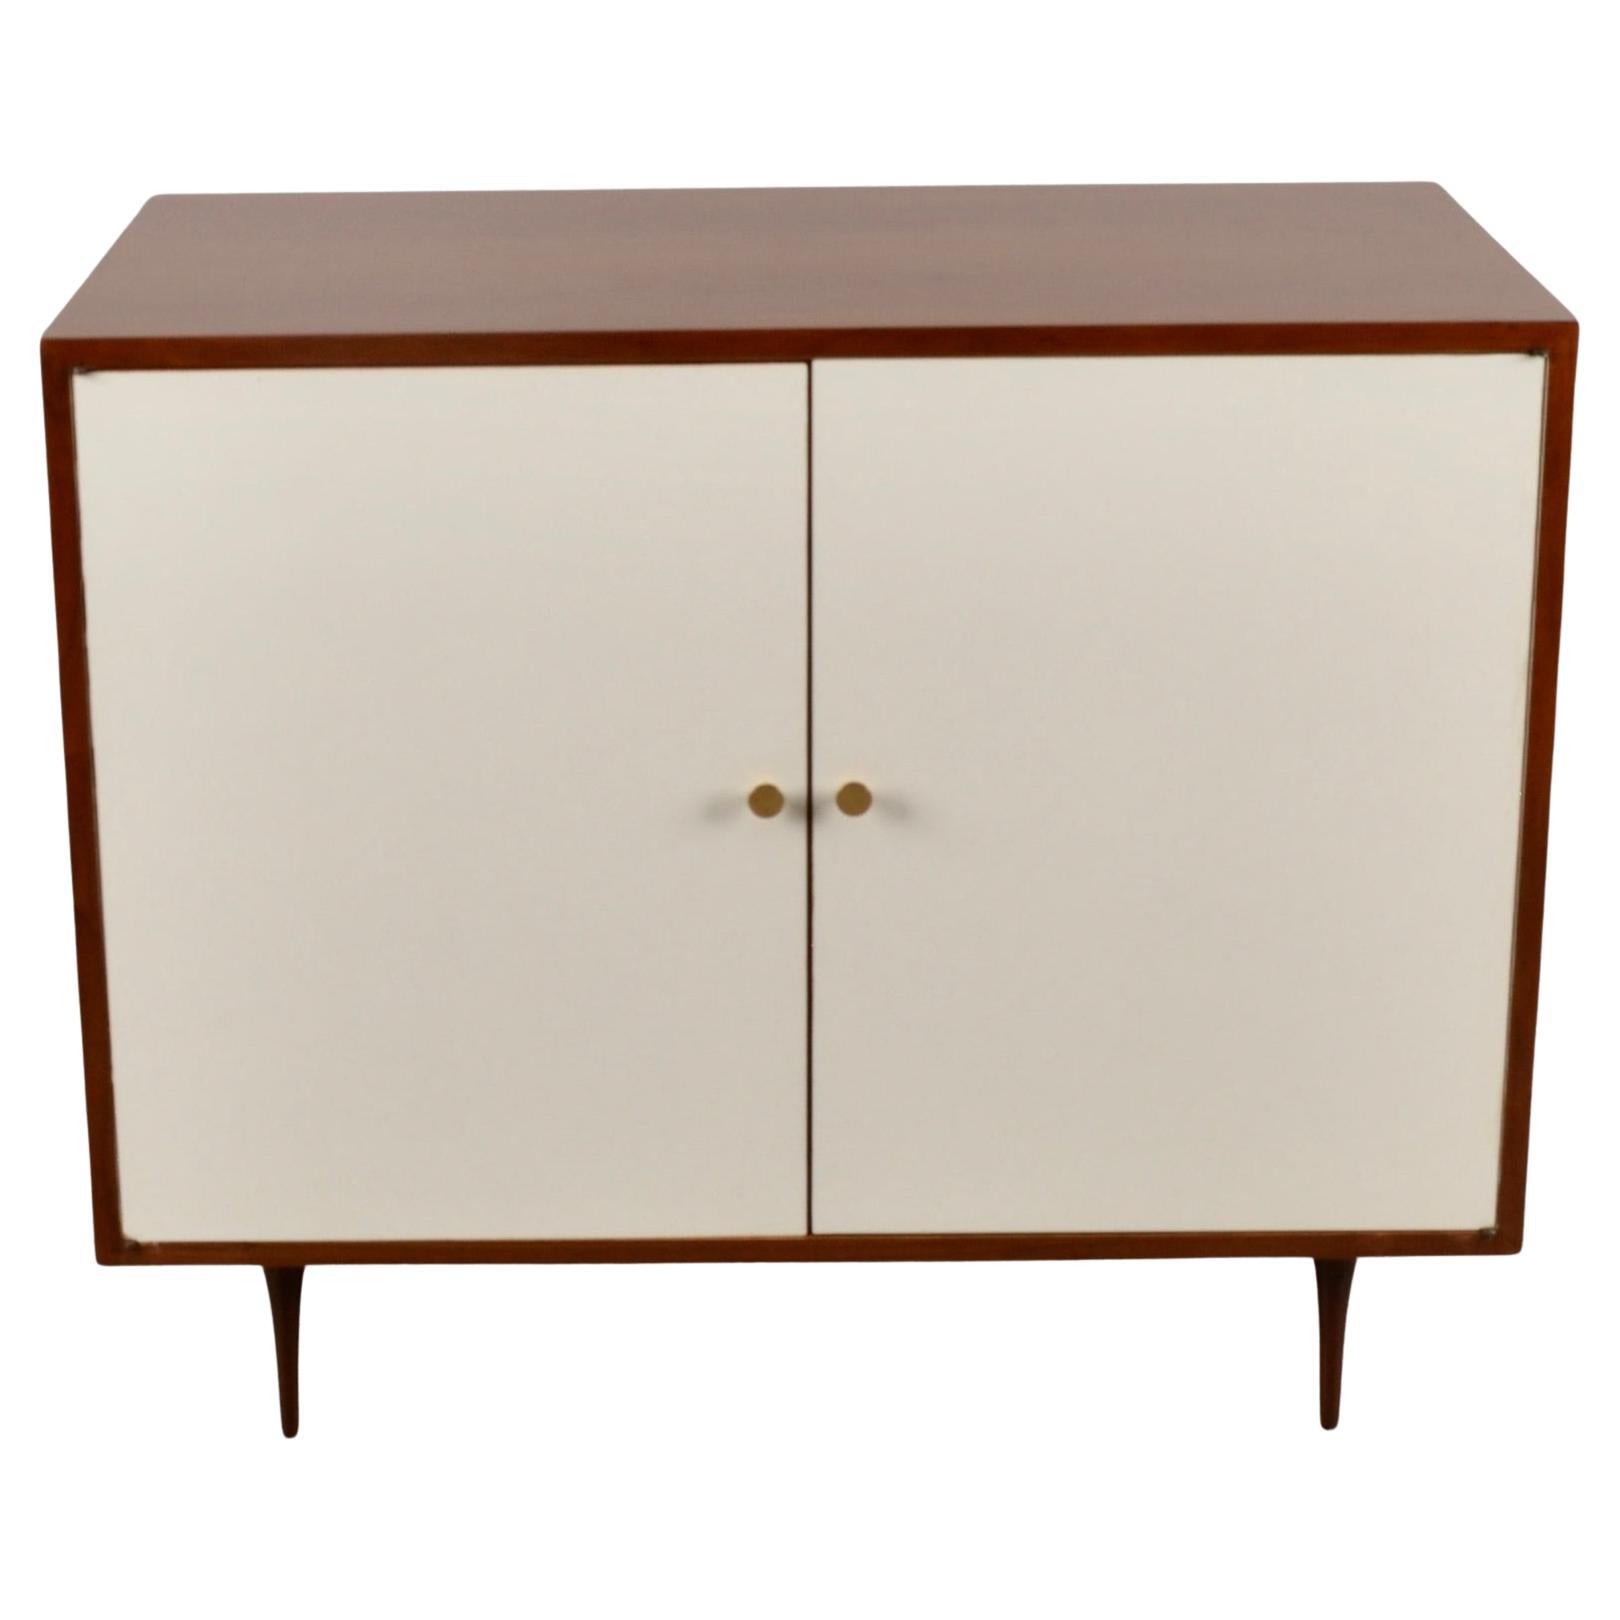 Simple cabinet in walnut with laminate veneered doors. Great size. Original brass pulls. And check out the spikes legs. So fab! Beautifully refinished with matte lacquer. Very fine condition.